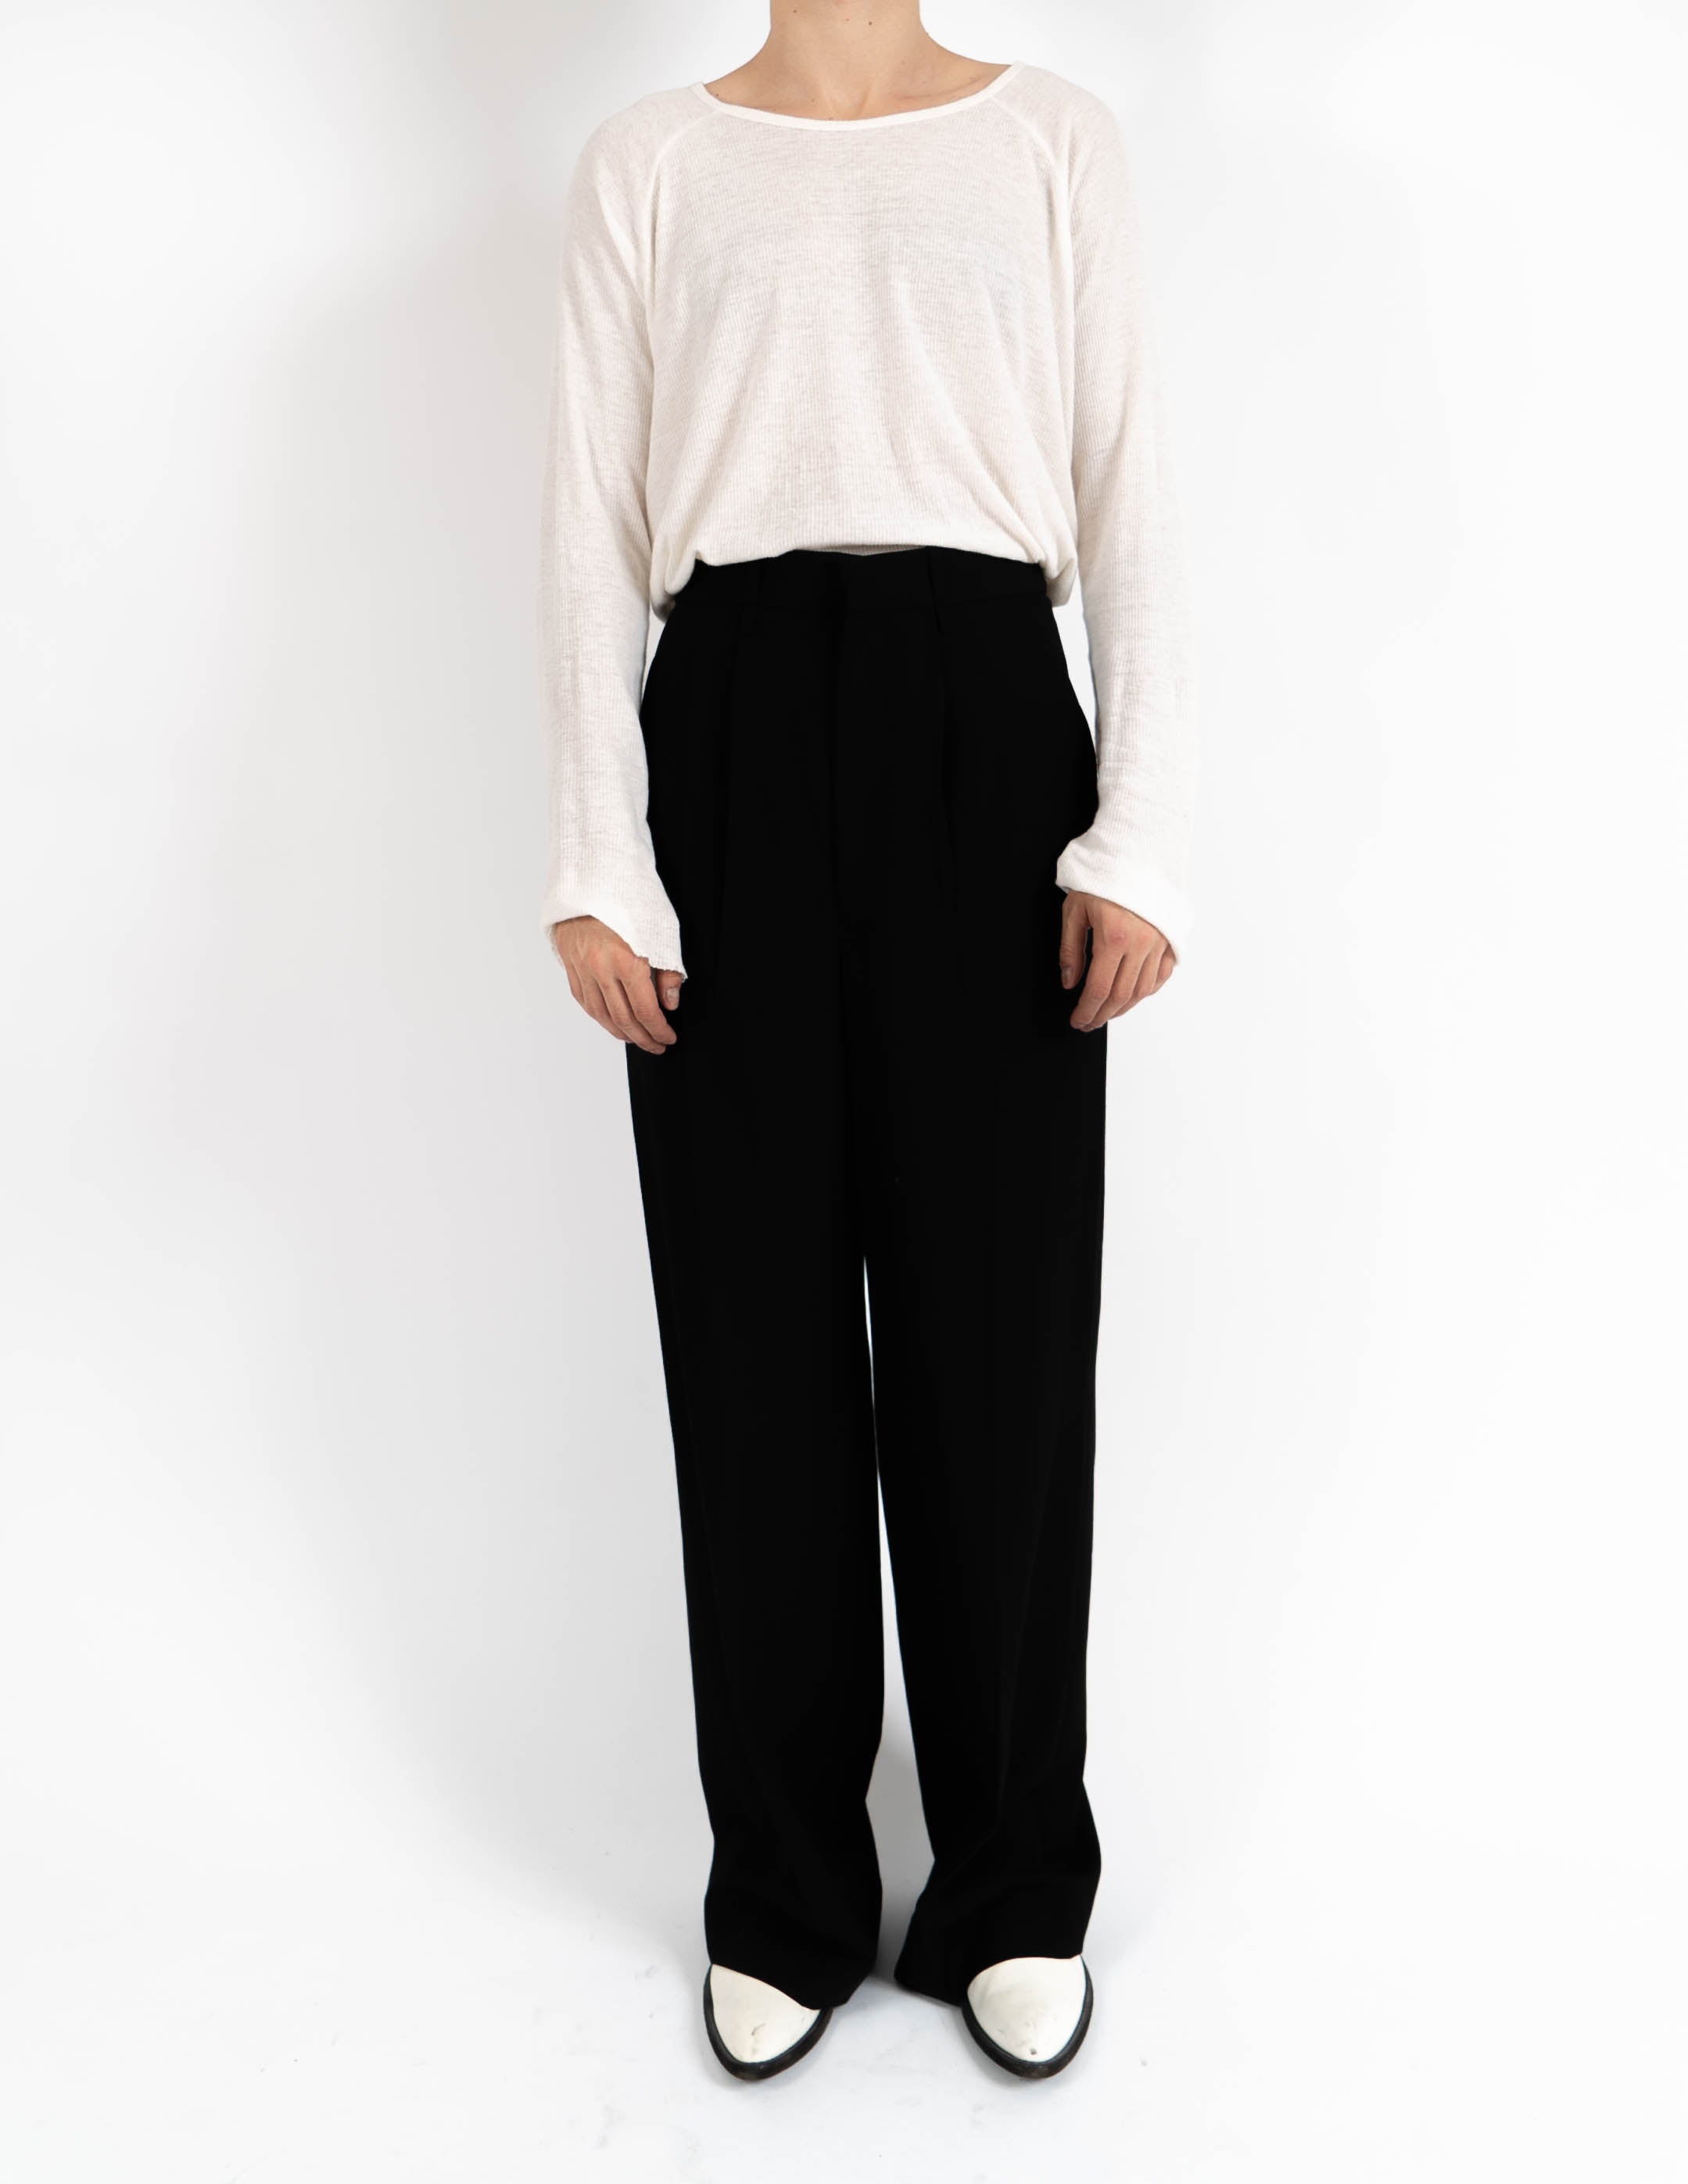 SS16 Cropped Ribbed Cashmere Longsleeve